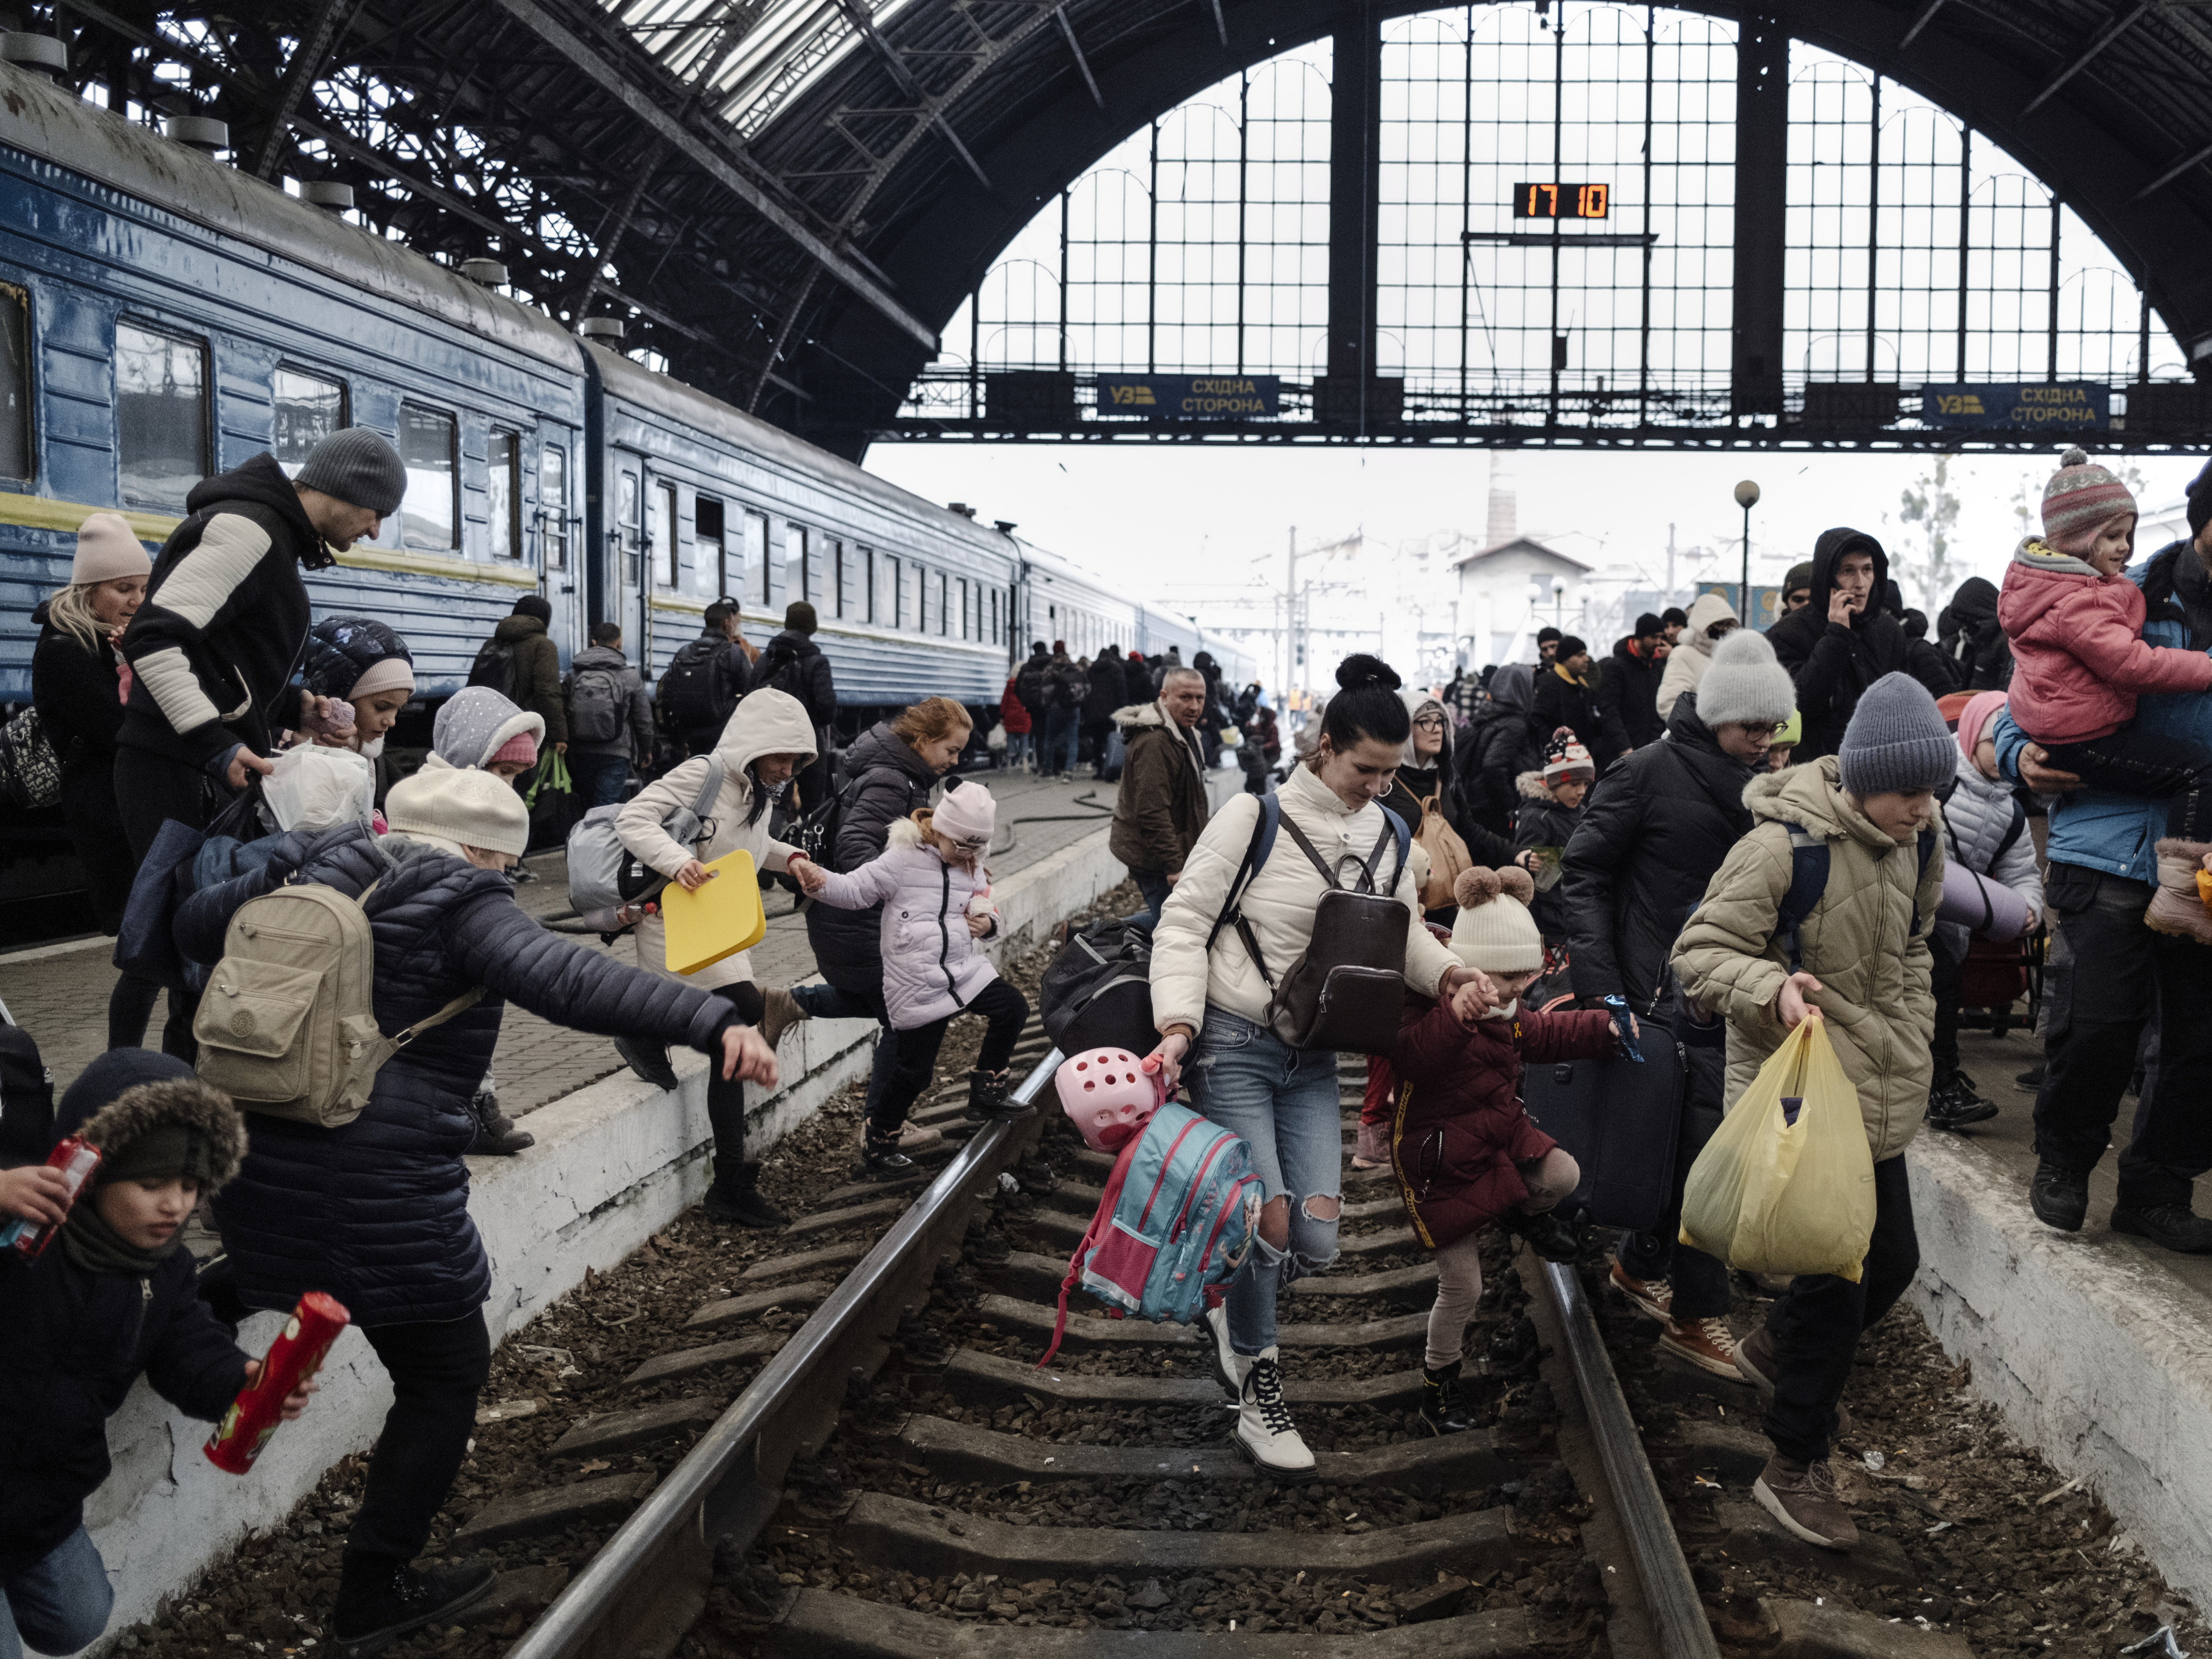 27 February 2022. Hundreds of people trying to escape the on-going conflict in Ukraine wait for a train to Poland at the central train station in Lviv. 